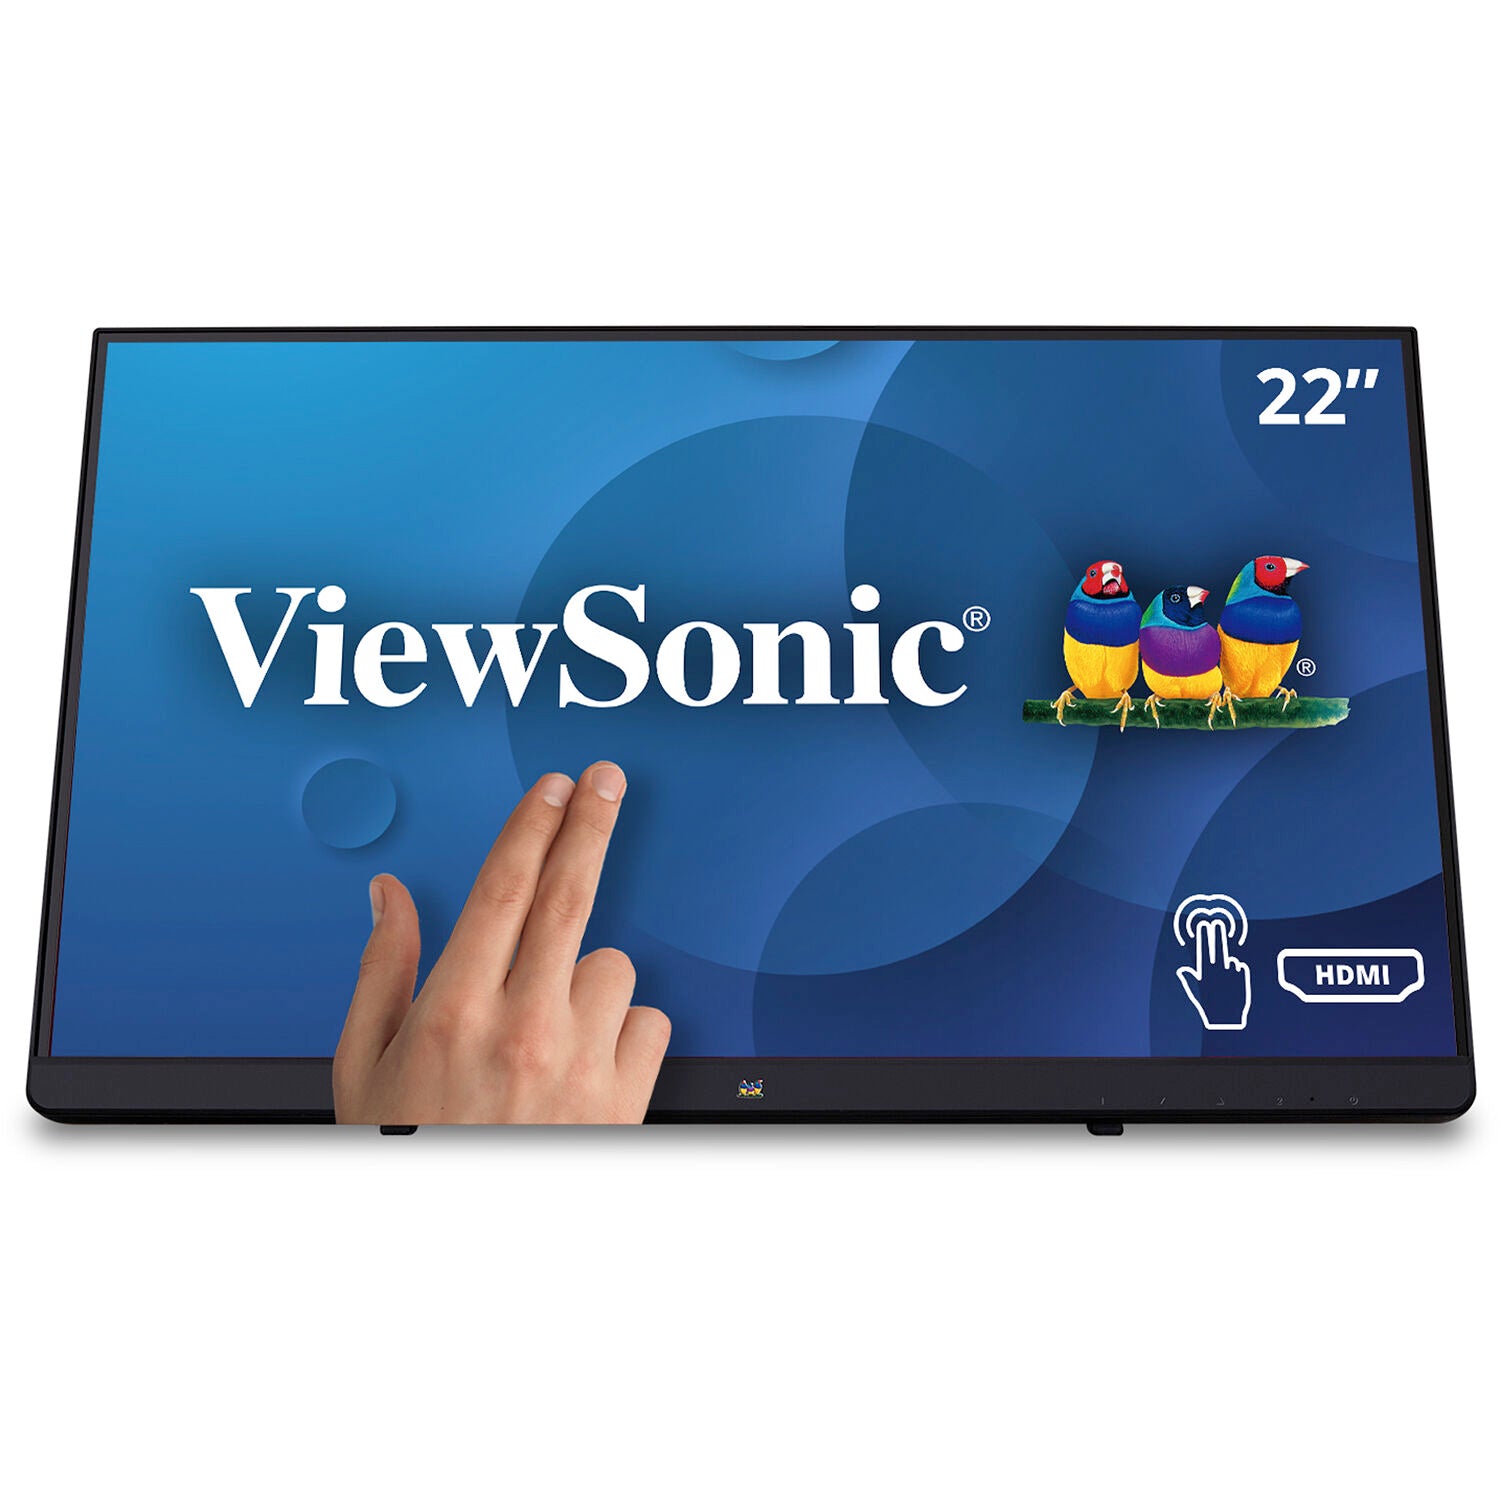 ViewSonic TD2230-R 22" Full HD Multi-Touch Display Monitor - Certified Refurbished